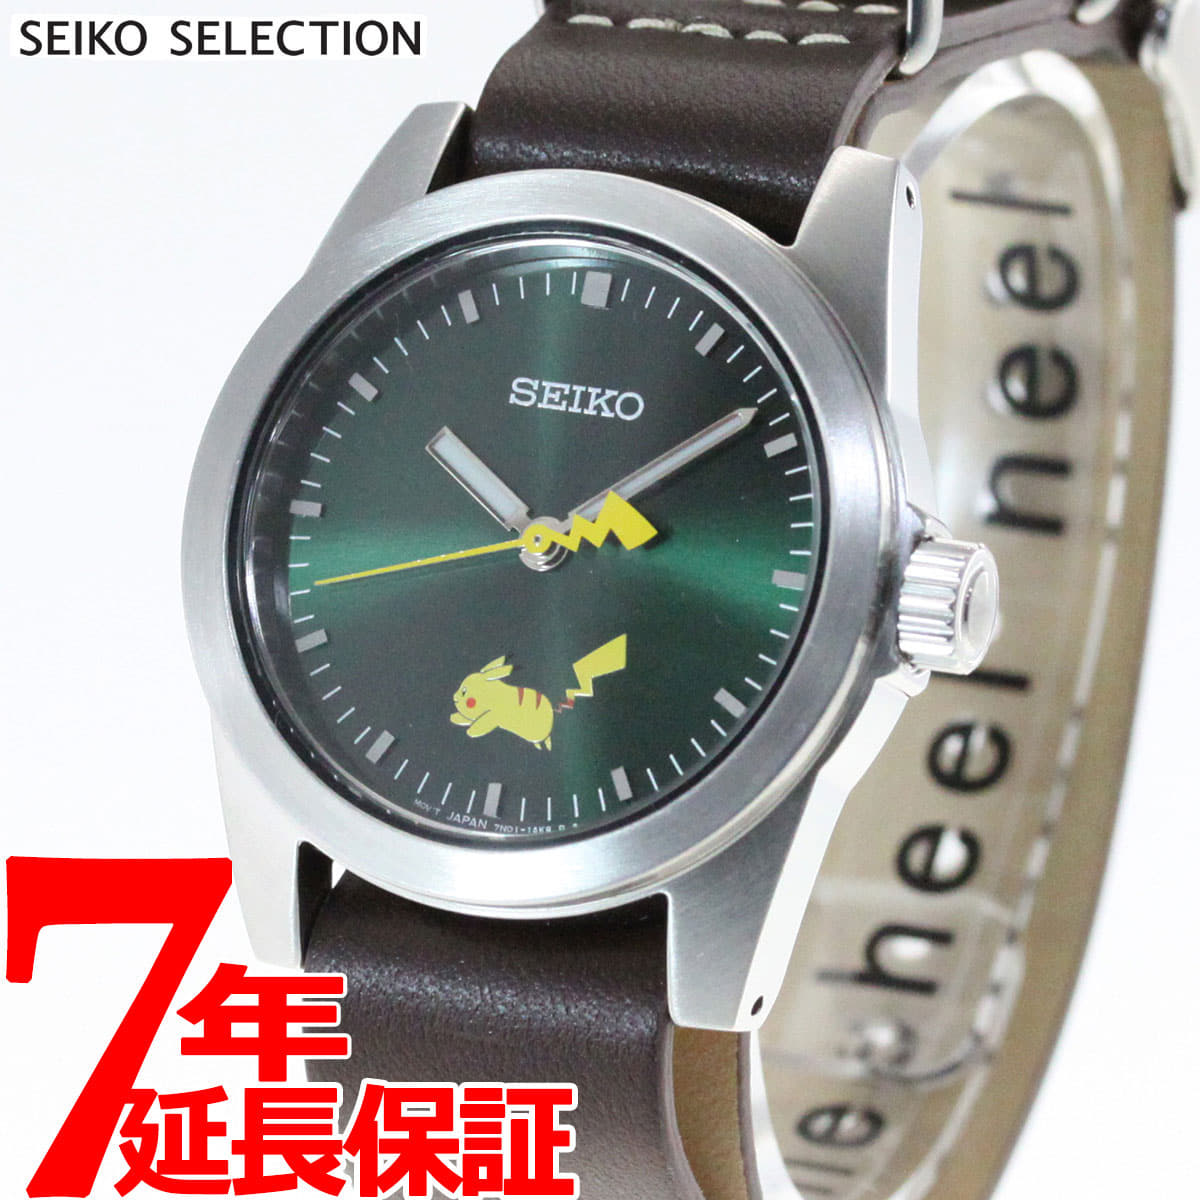 New]It is up to 36 times SEIKO selection mens Ladies Pokemon Pikachu Pocket  Monster collaboration model leather belt SEIKO SELECTION SCXP177 2020  latest - BE FORWARD Store